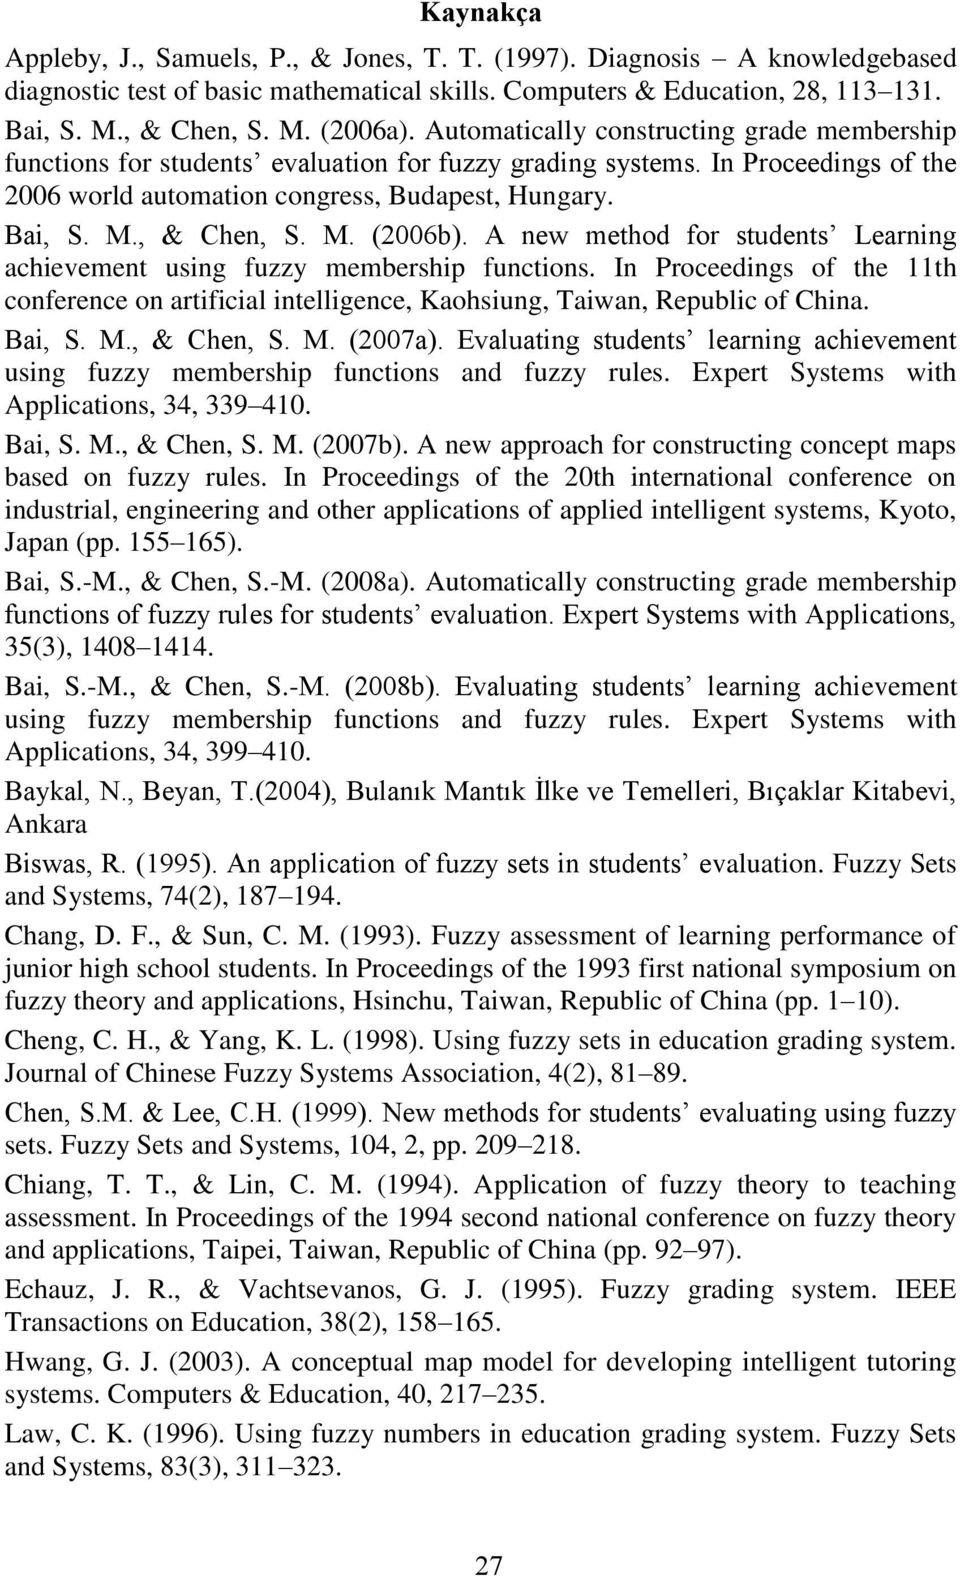 M. (2006b). A new method for students Learning achievement using fuzzy membership functions. In Proceedings of the 11th conference on artificial intelligence, Kaohsiung, Taiwan, Republic of China.